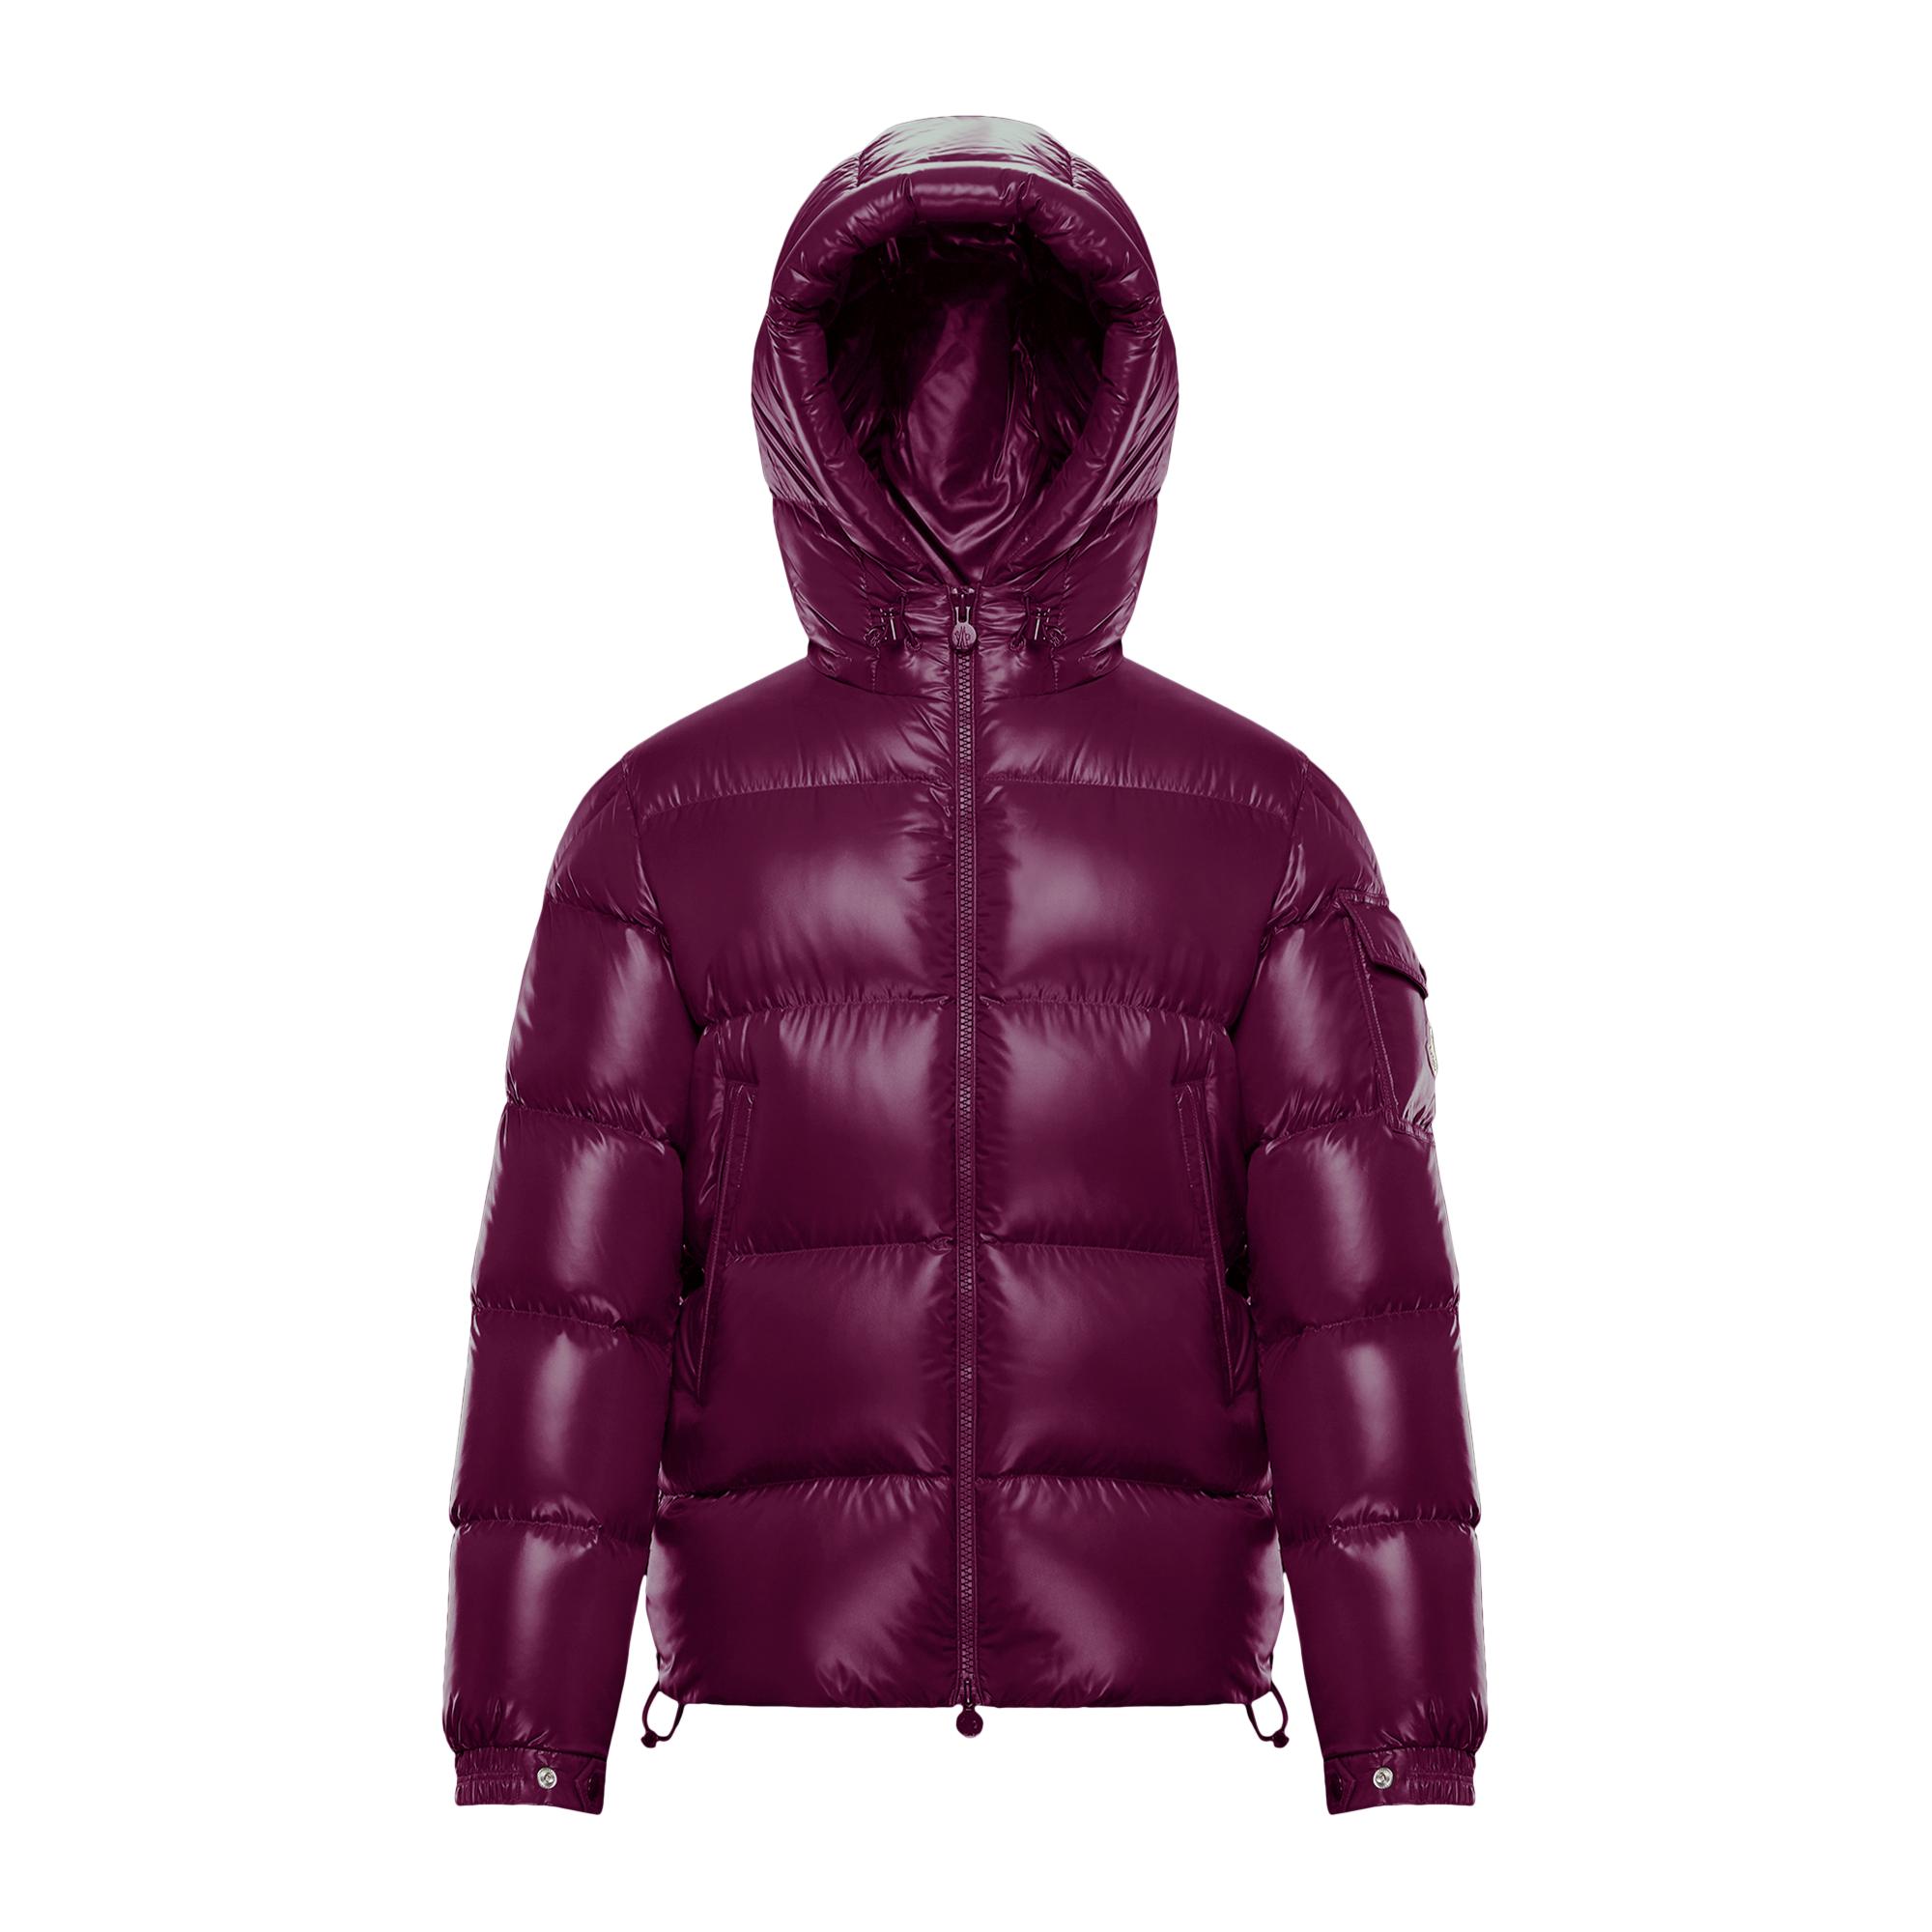 Moncler Synthetic Ecrins in Bright Purple (Purple) for Men - Lyst